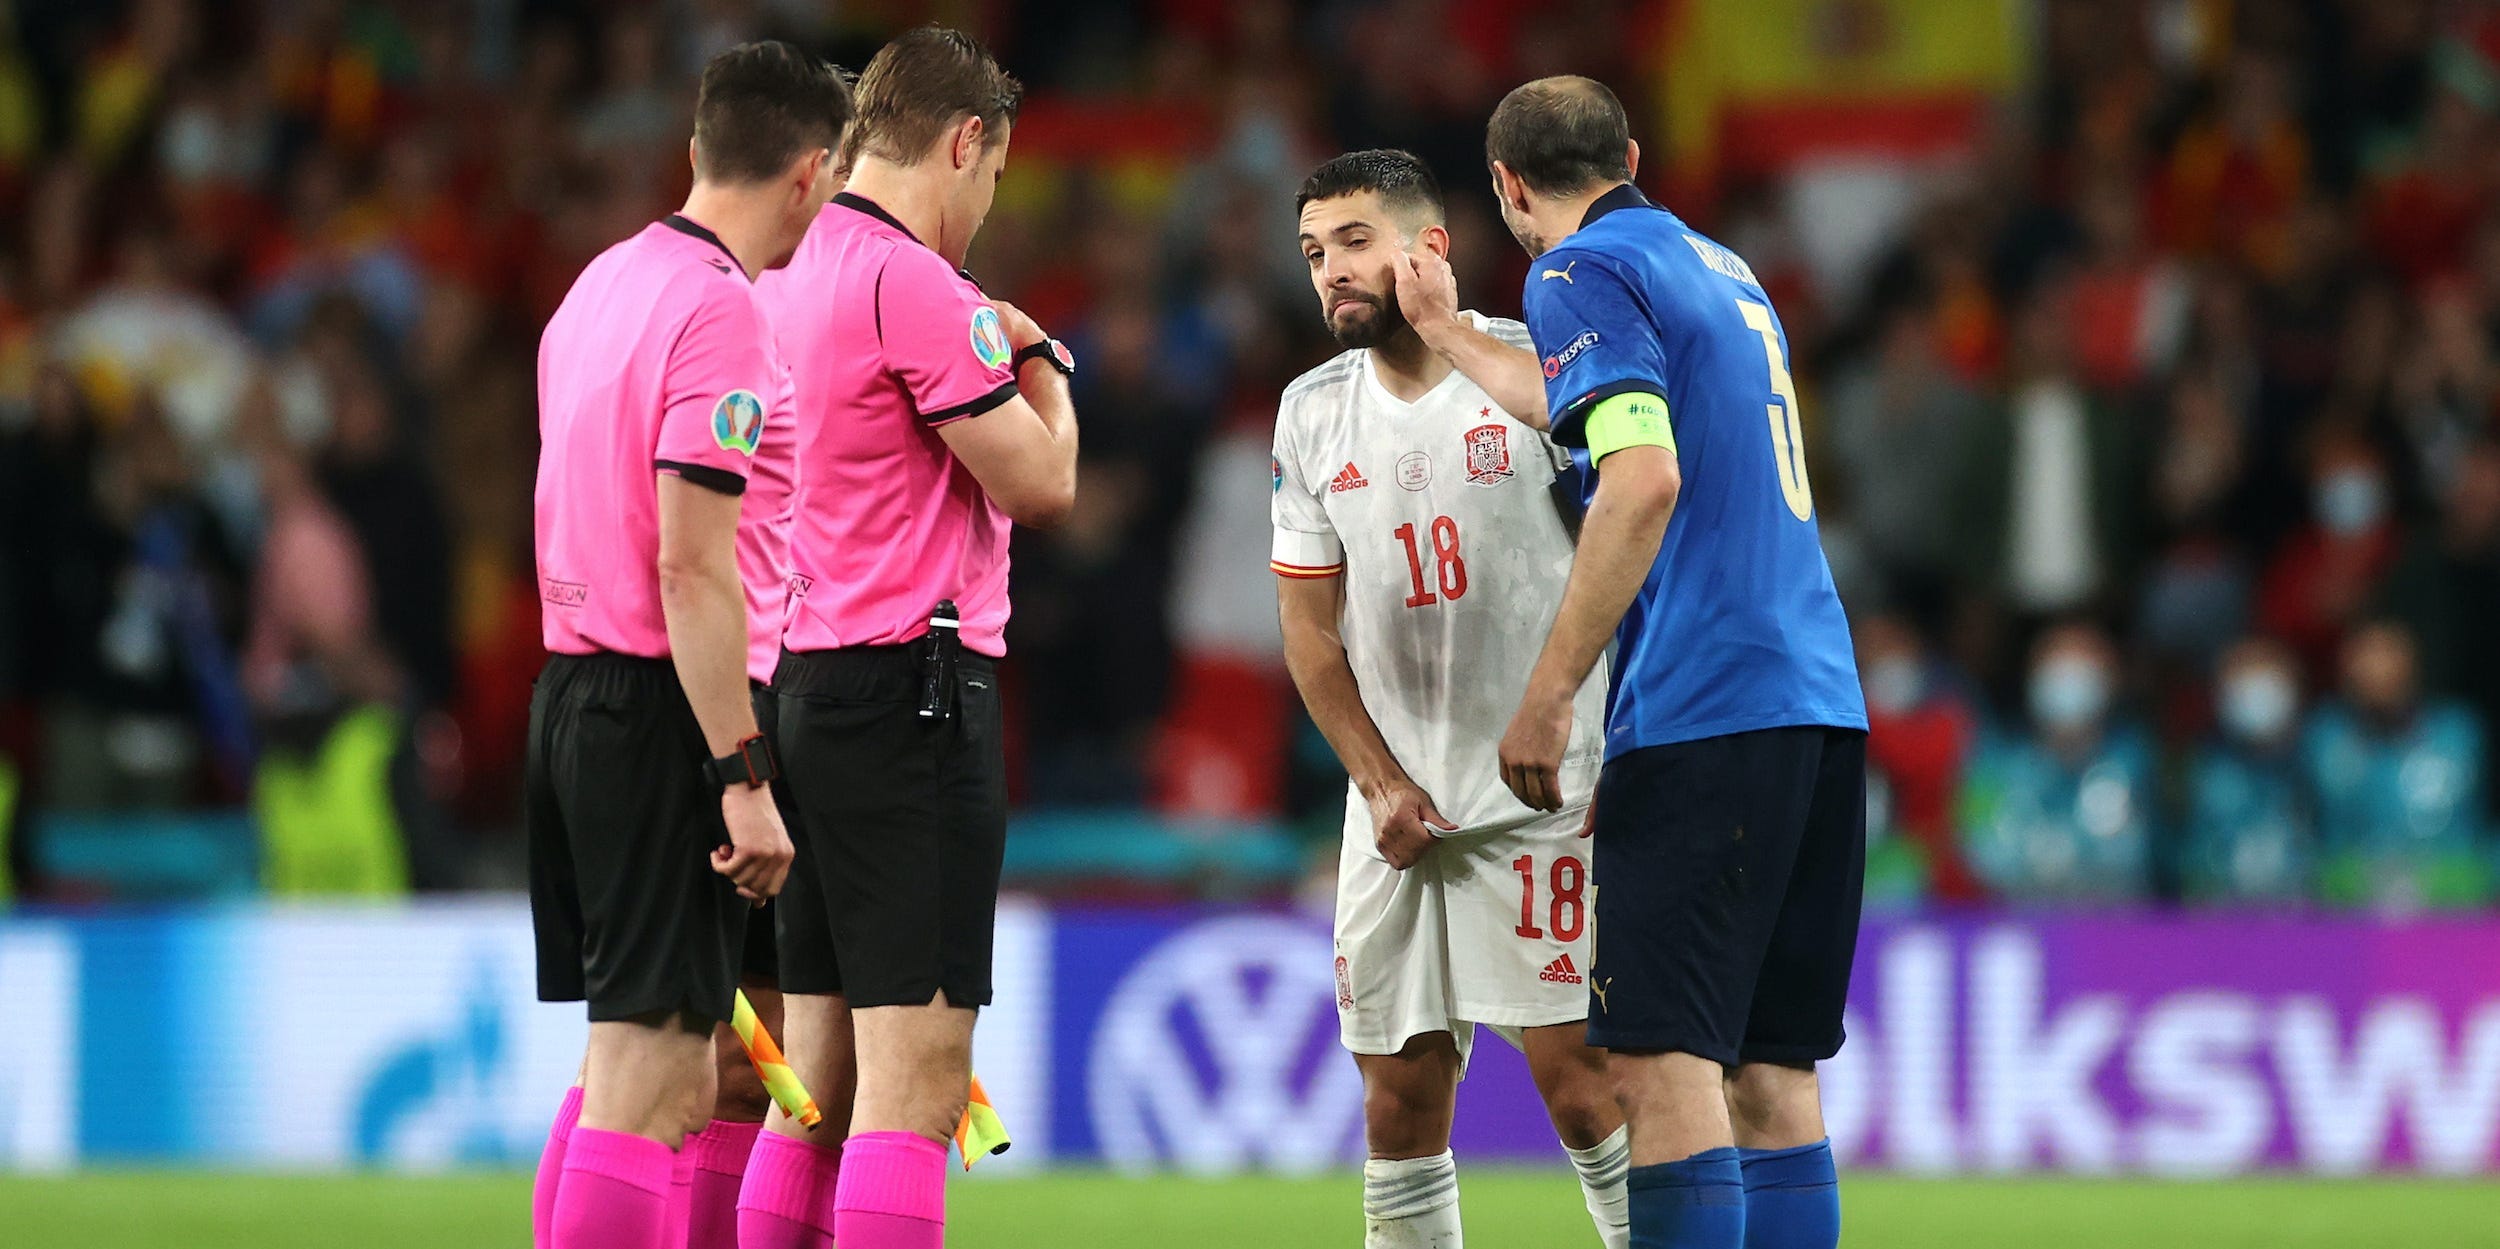 Italy's Giorgio Chiellini psyches out Spain's Jordi Alba ahead of the teams' Euro 2020 semifinal penalty shootout